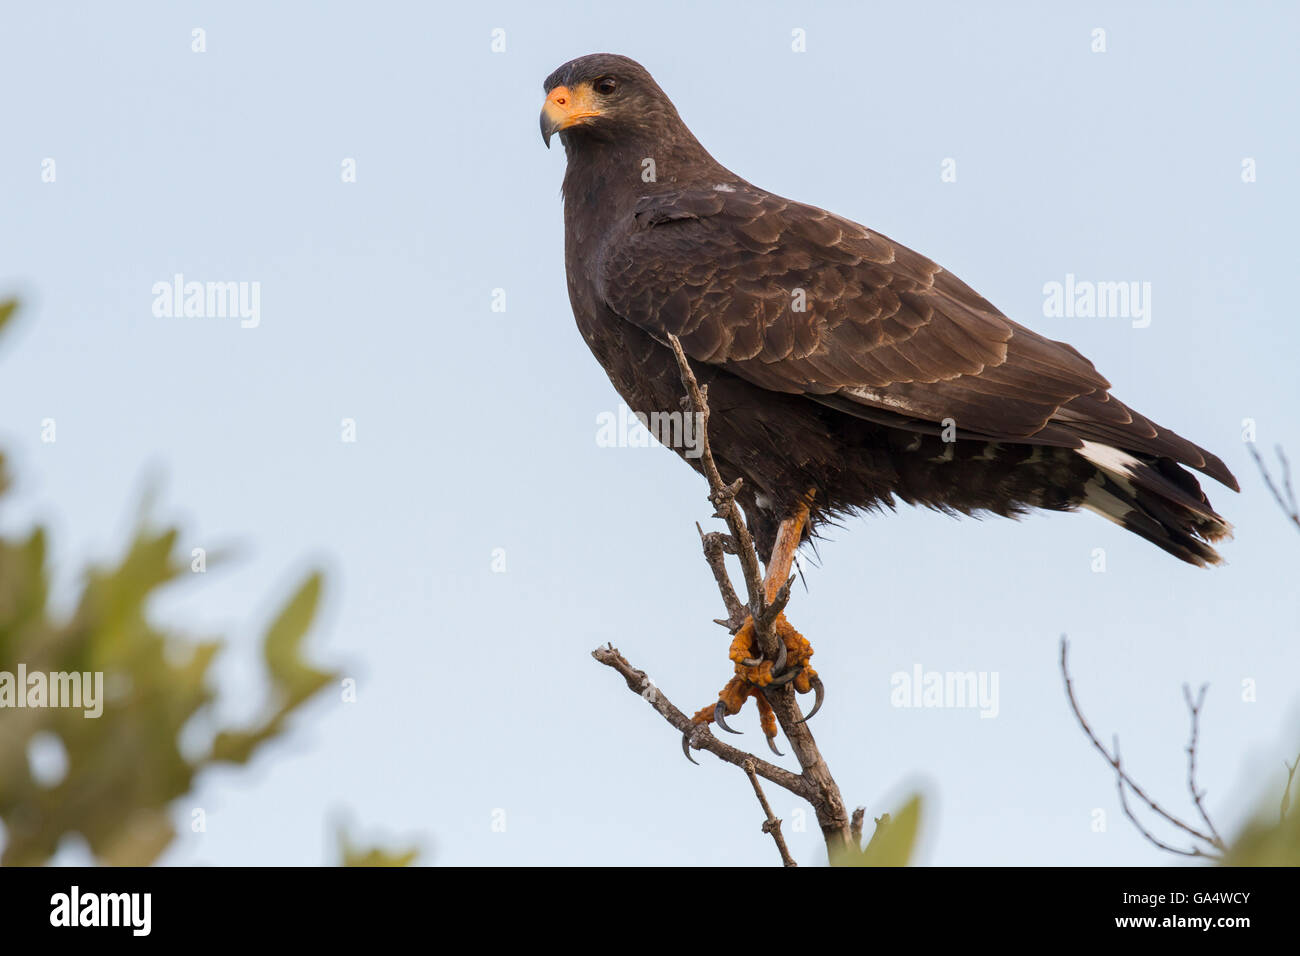 Cuban Black Hawk perched on a branch in Zapata Swamp, a popular birdwatching area in Cuba Stock Photo